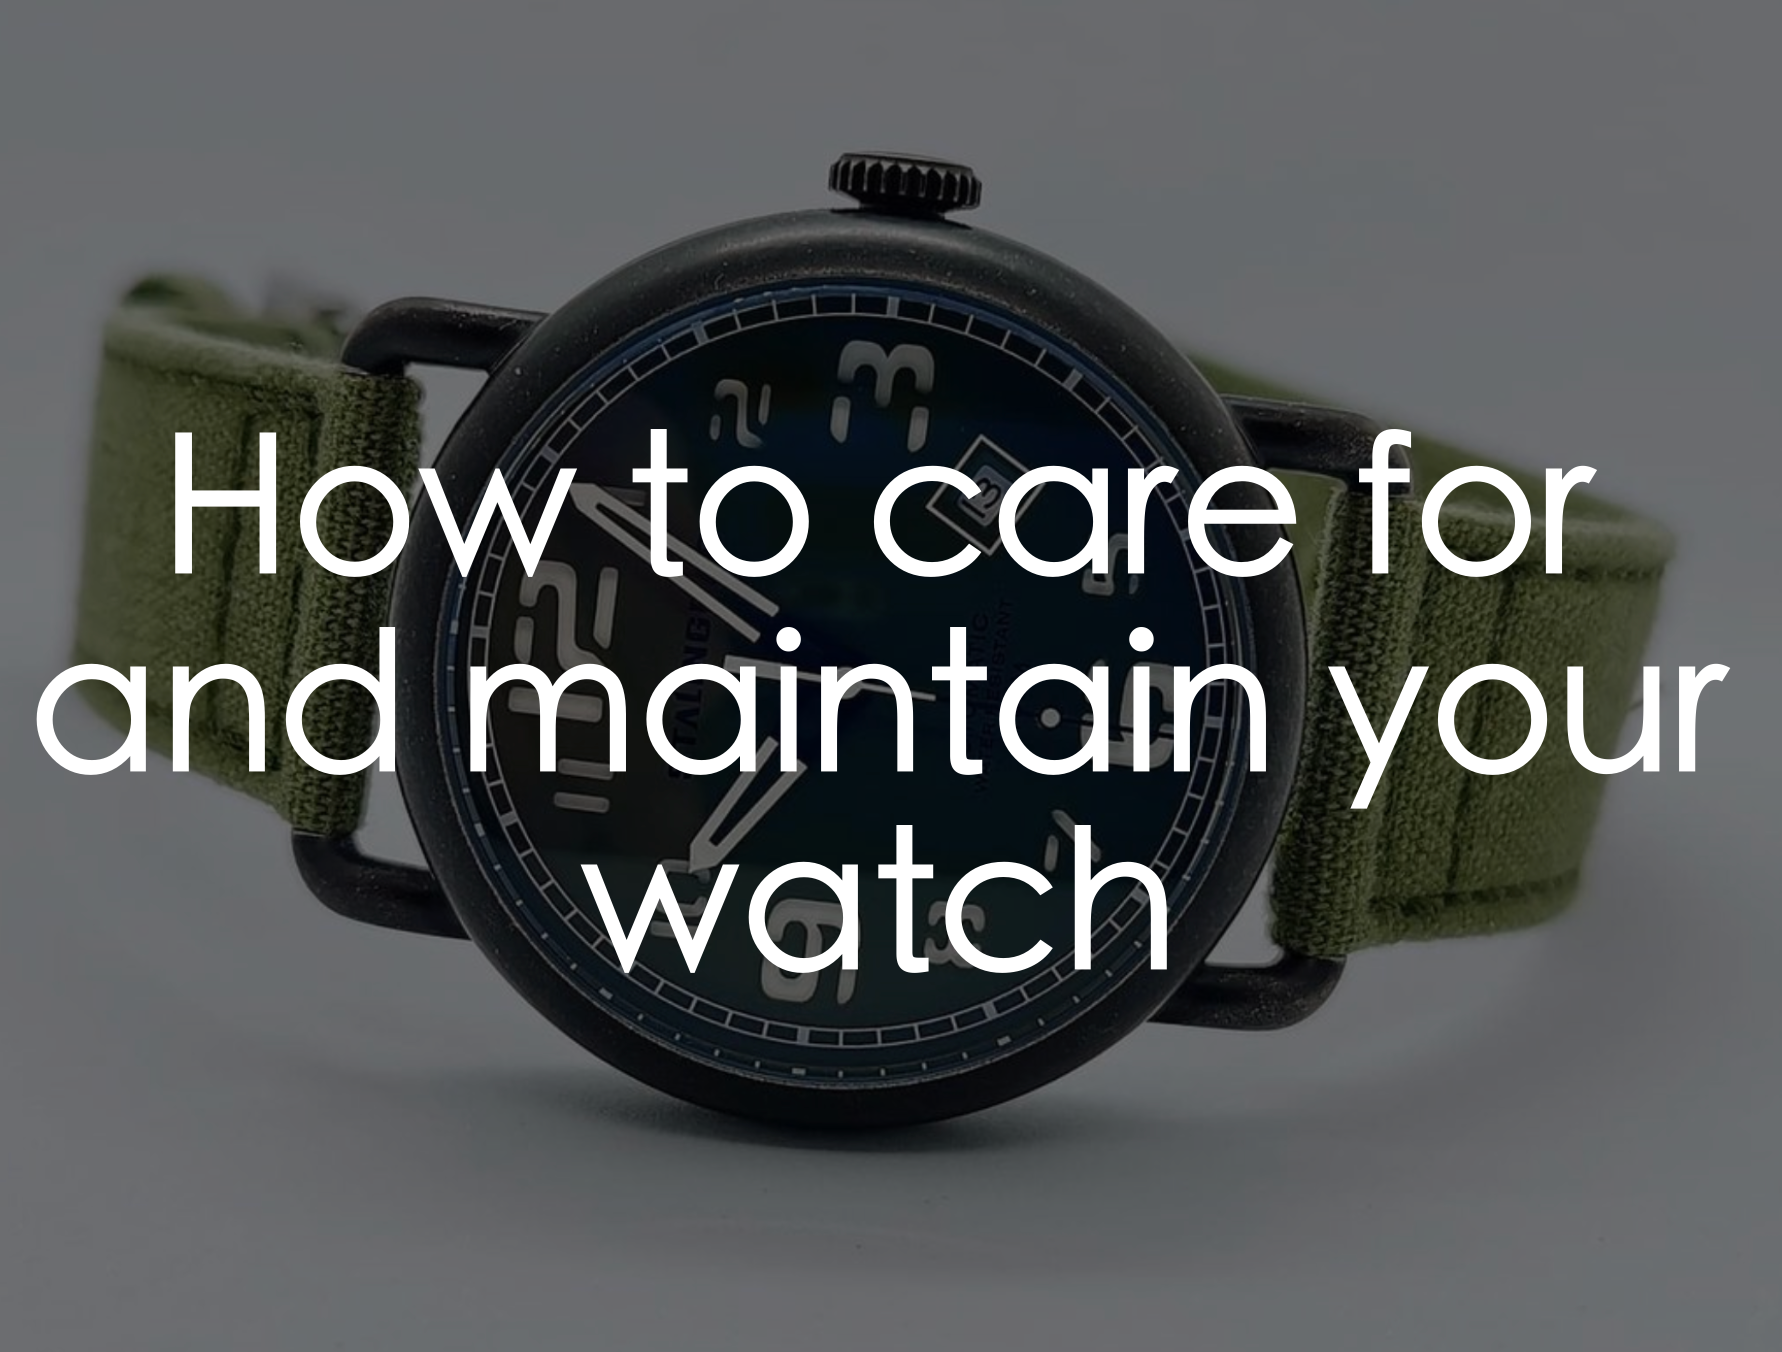 How to care for your watch